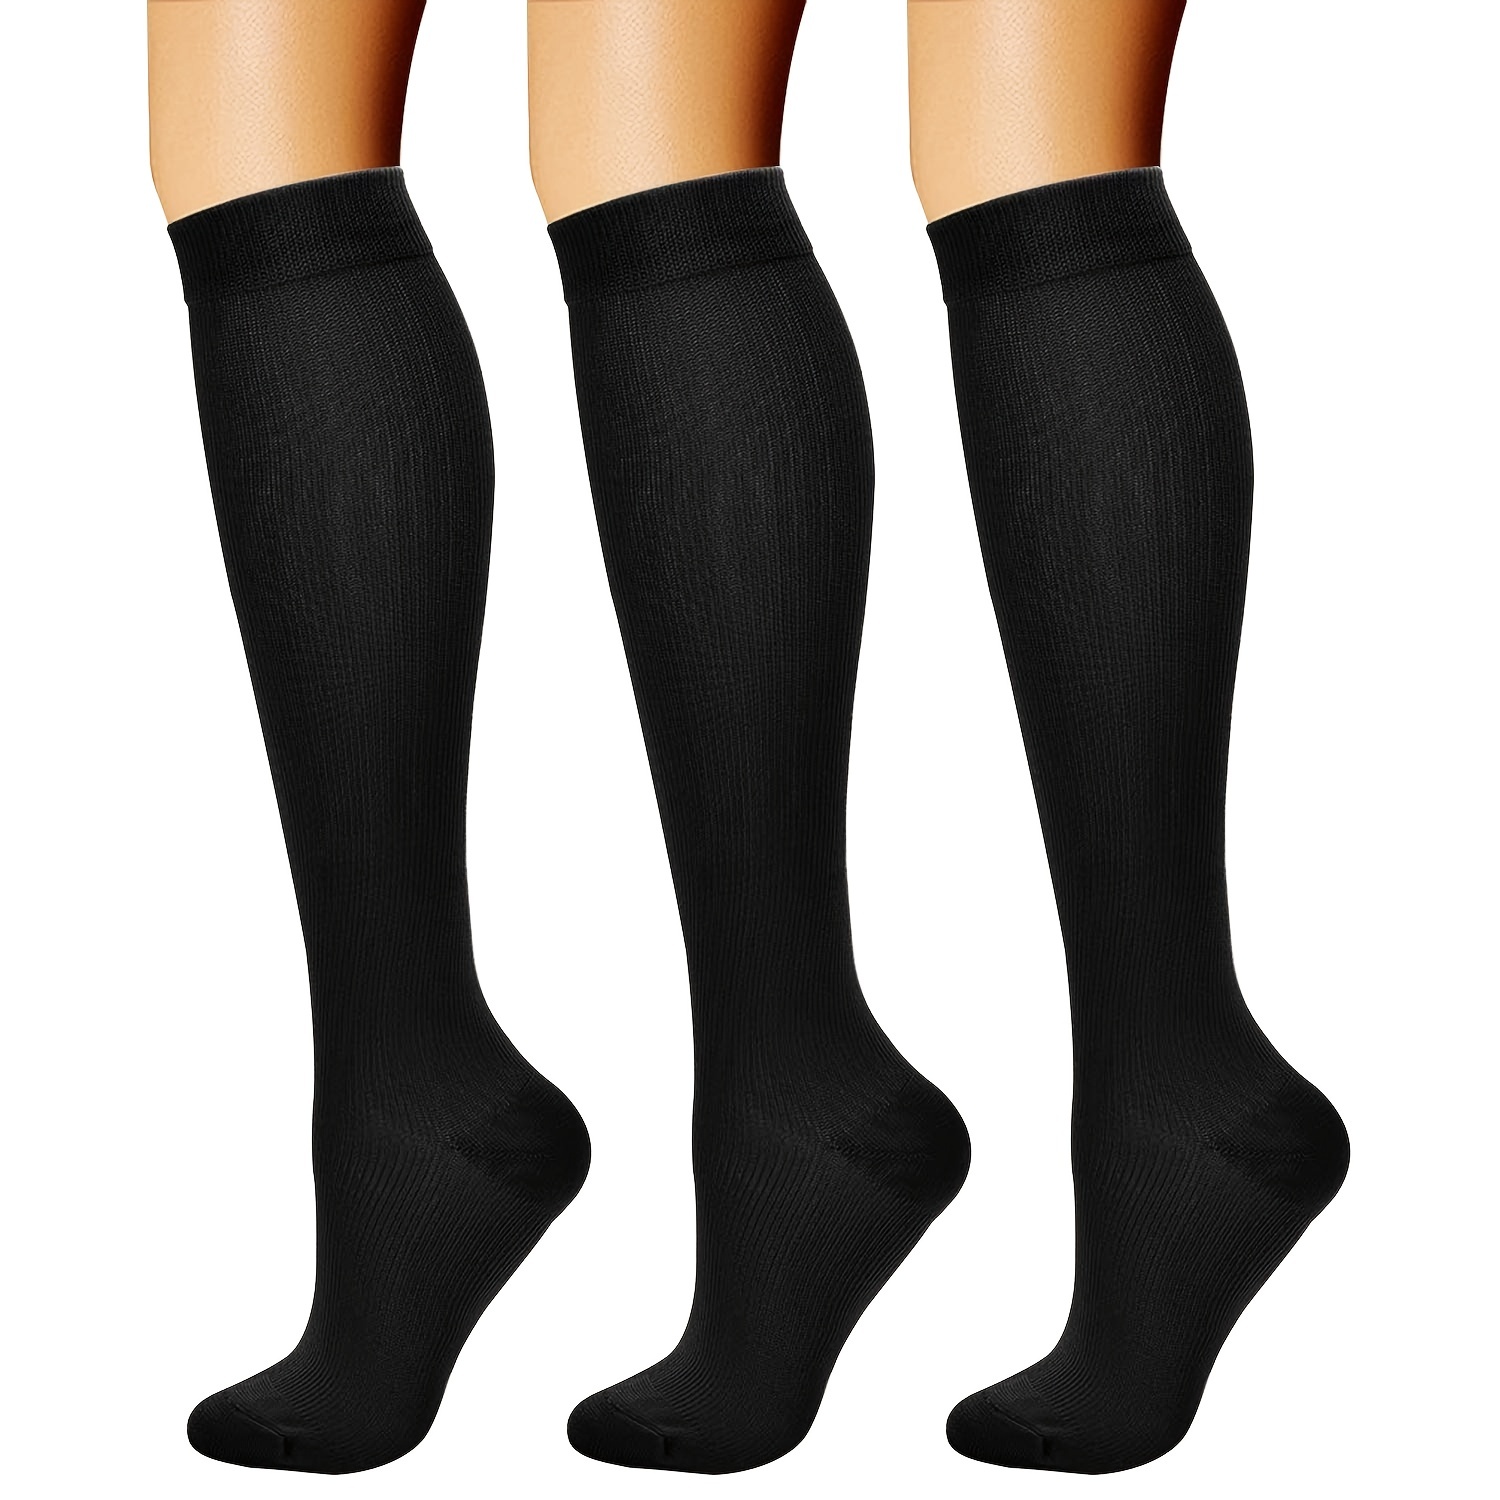 Womens Athletic Women Compression Stockings With Varicose Veins